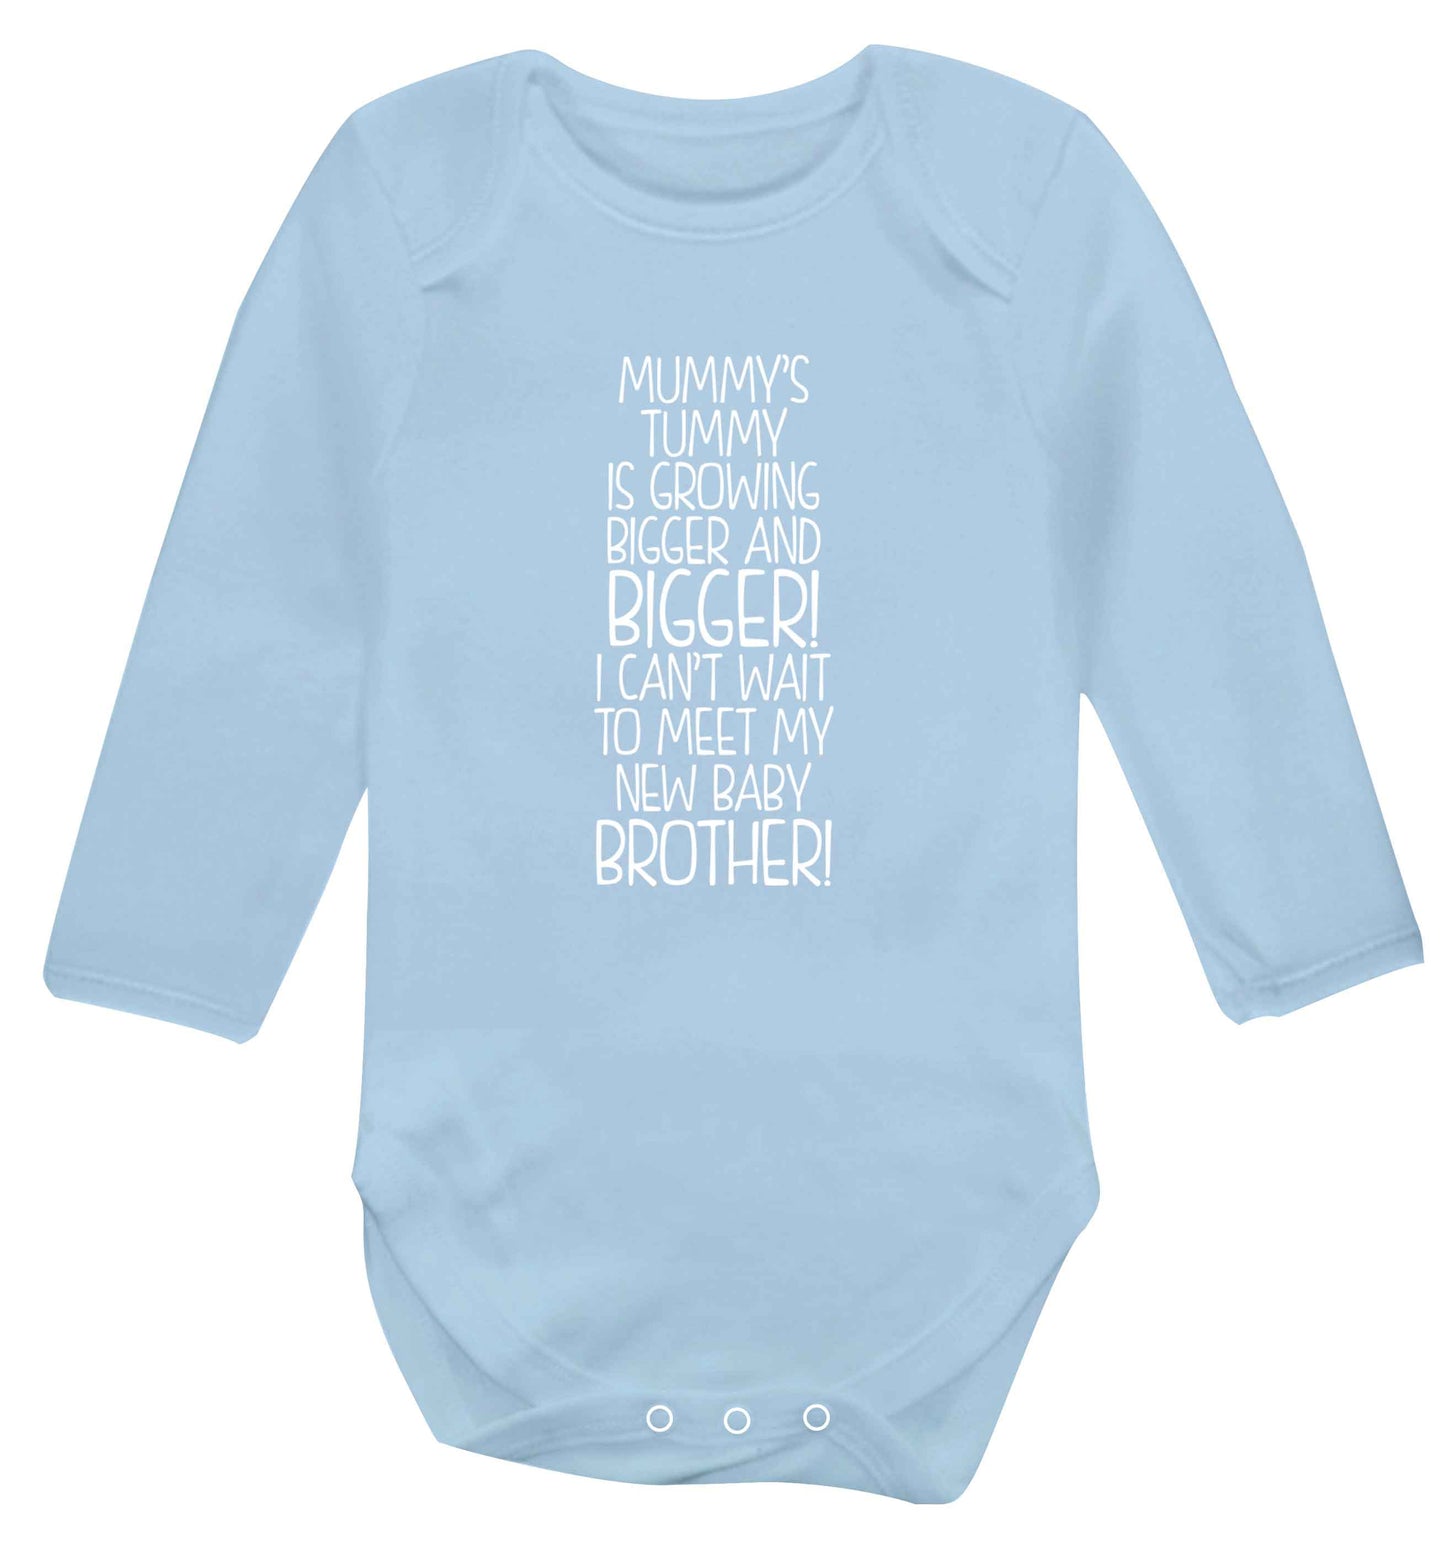 Mummy's tummy is growing bigger and bigger I can't wait to meet my new baby brother! Baby Vest long sleeved pale blue 6-12 months